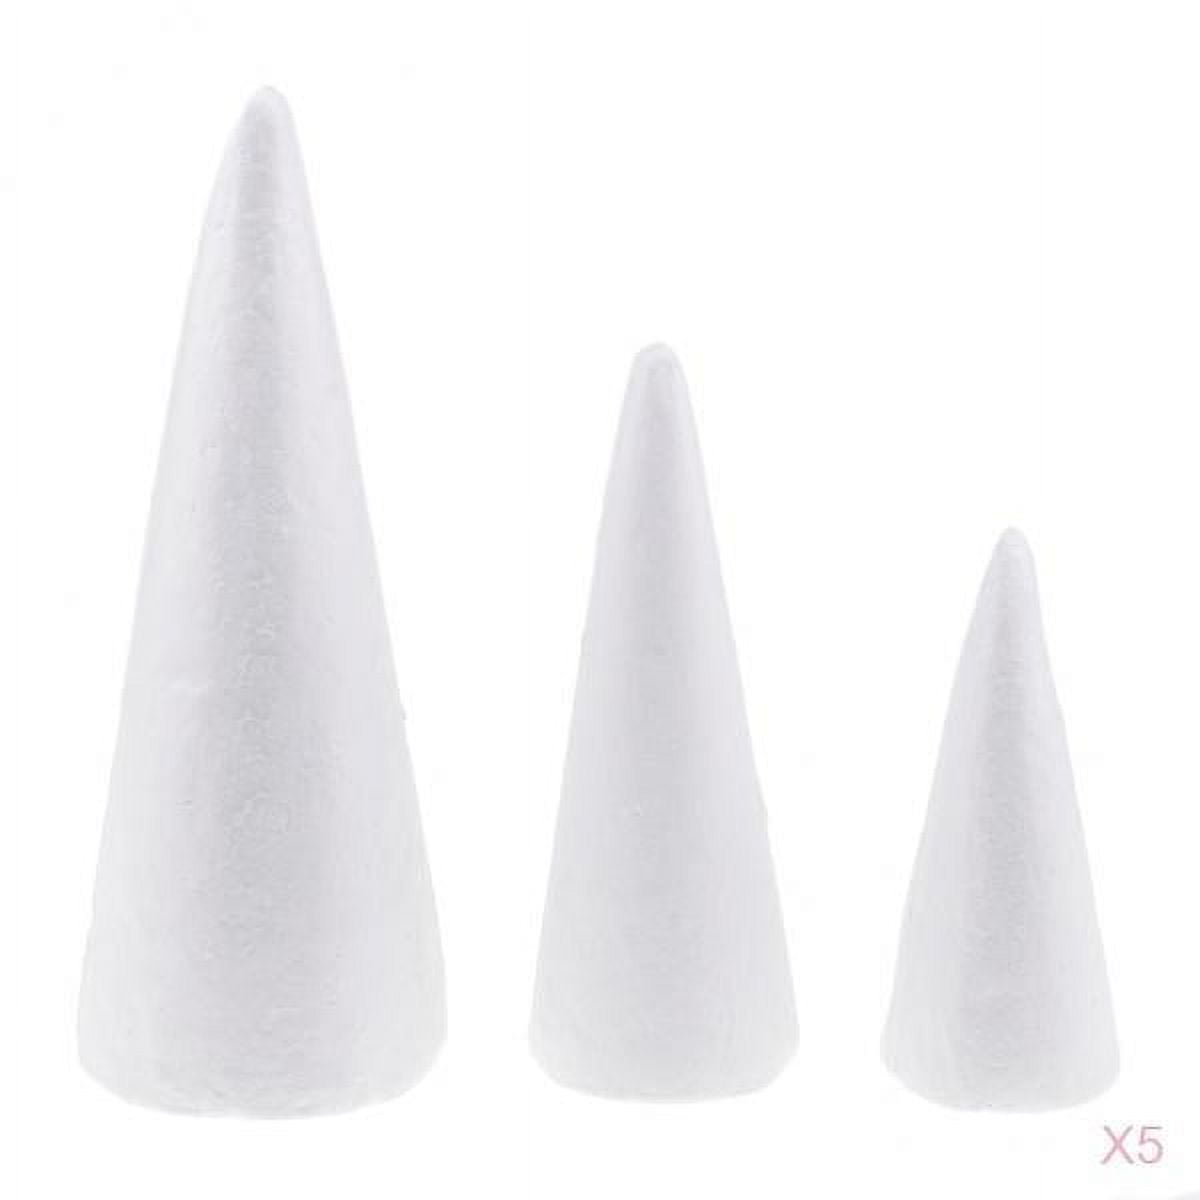 6 x 5pcs of size Polystyrene White Foam Cone Shapes Modelling craft Wedding  Party Christmas Decoration Kids Toys - Approx. 3/6 inch